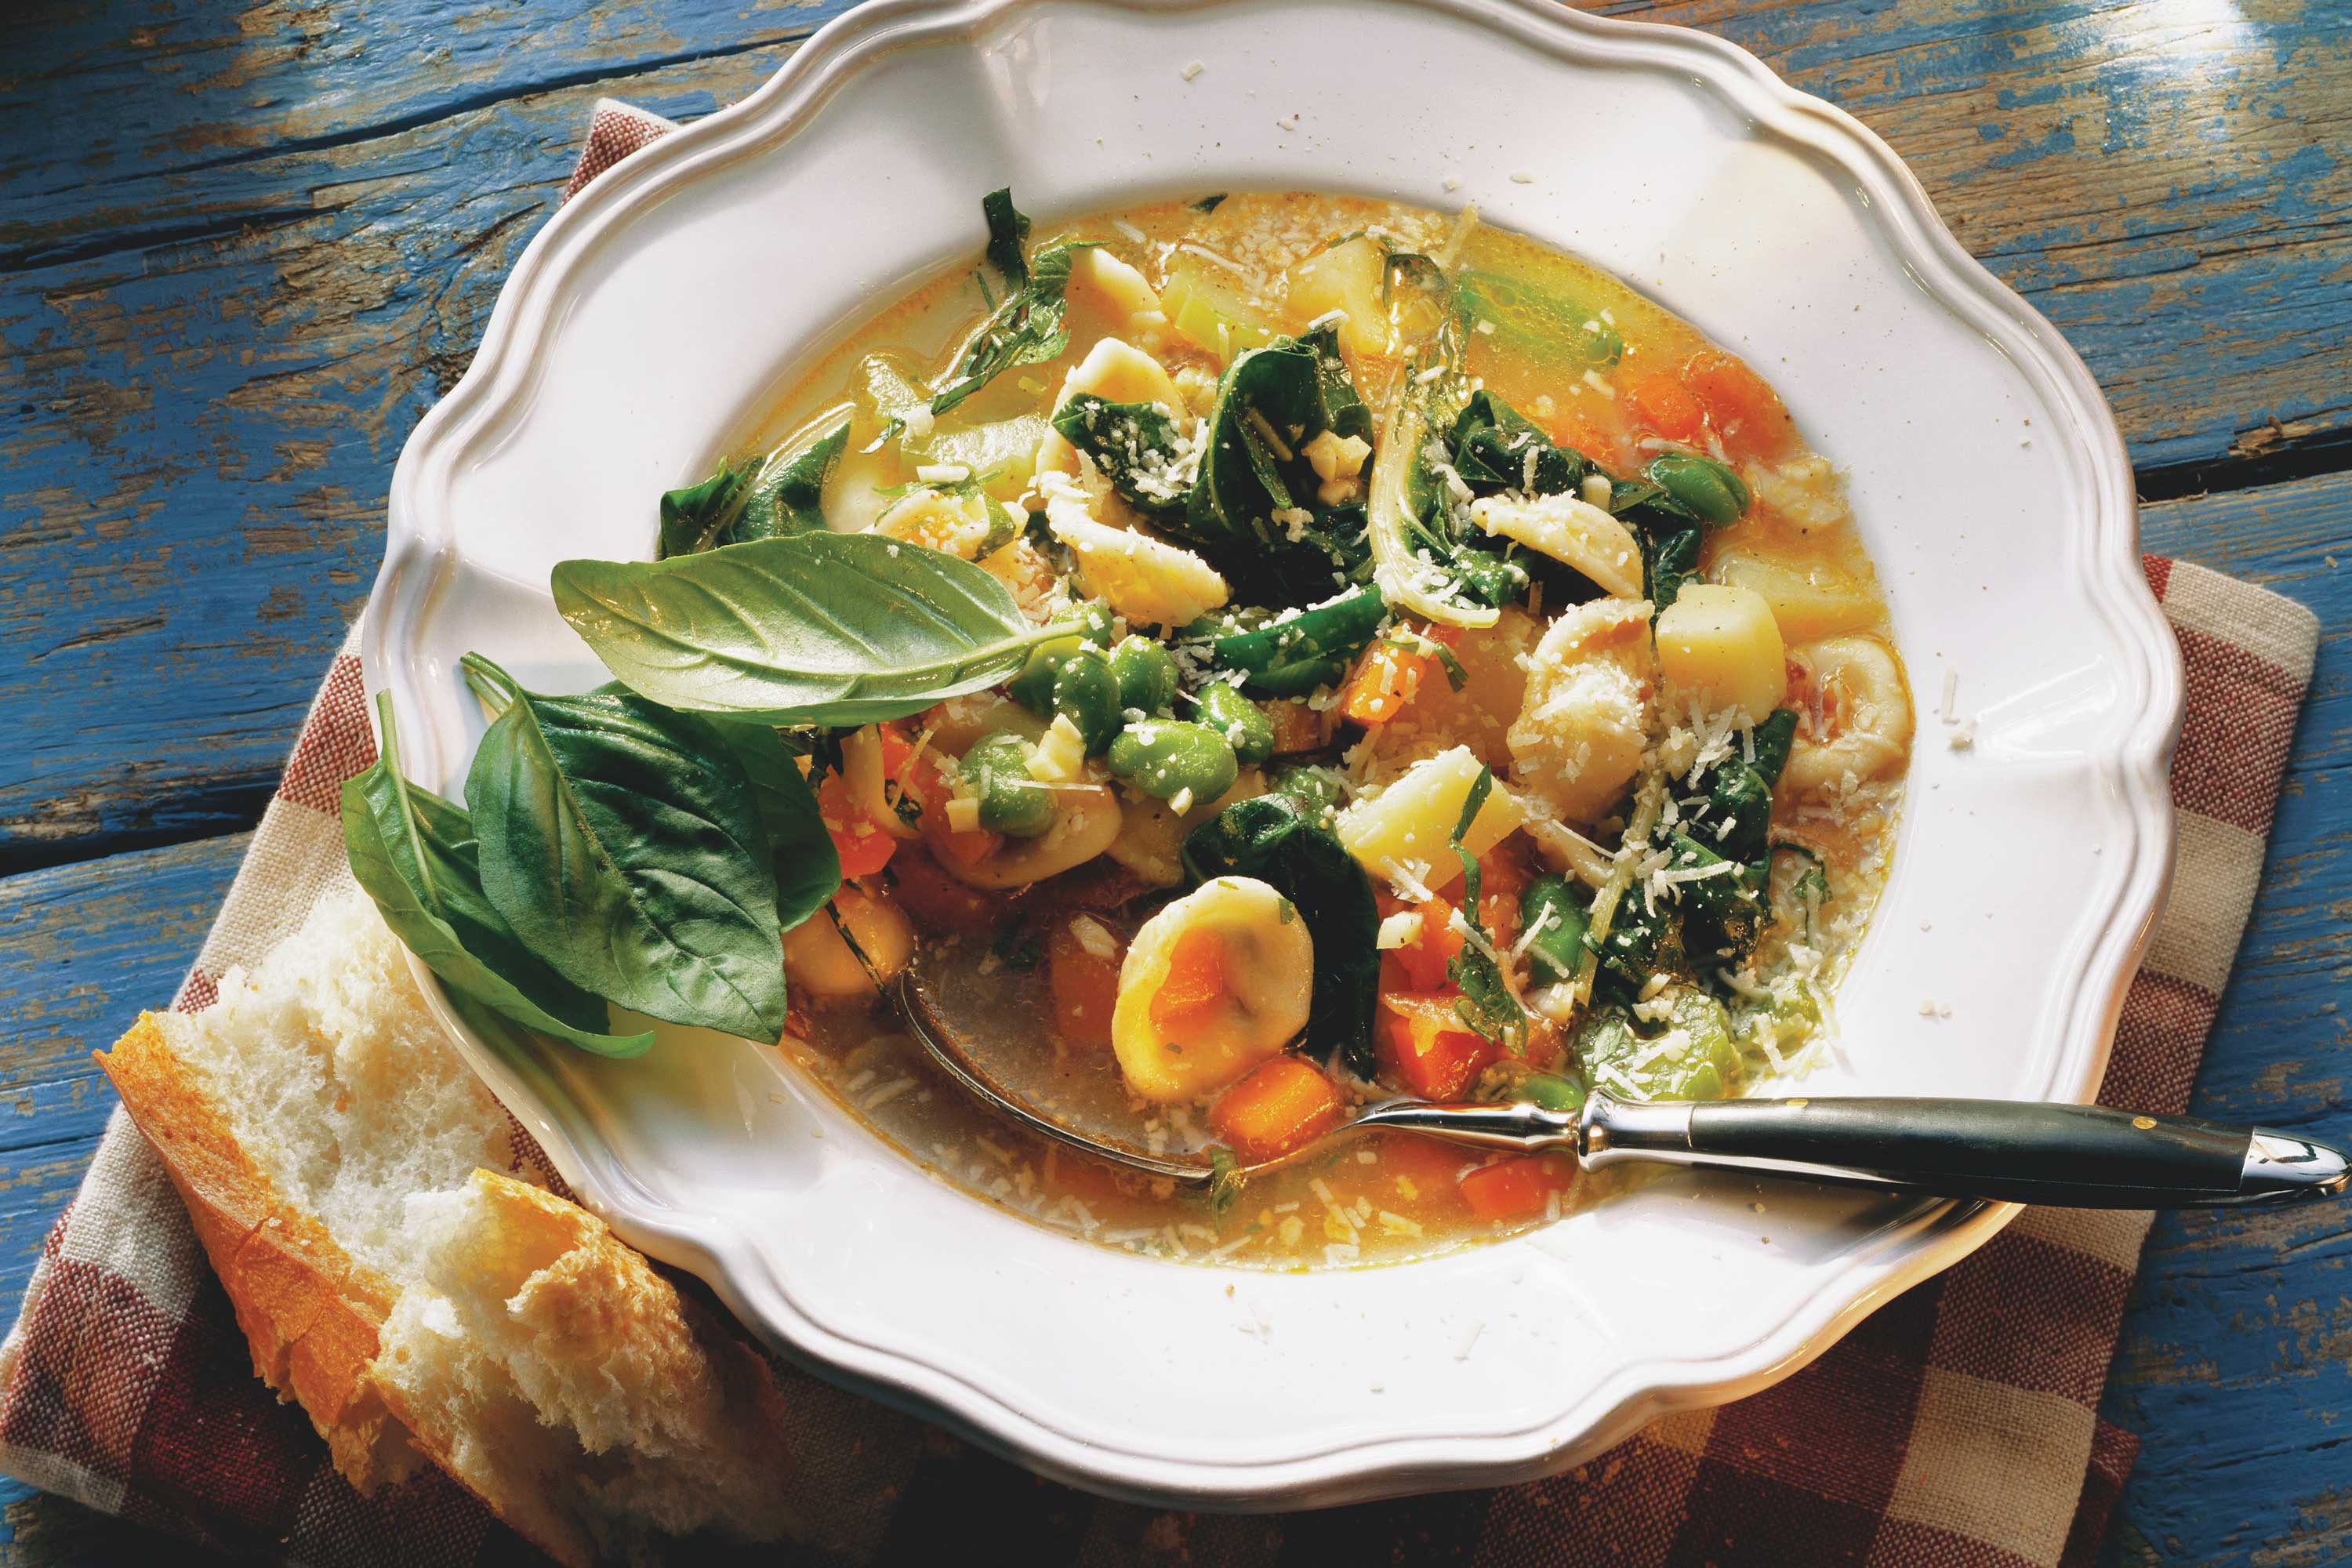 A bowl of homemade minestrone soup